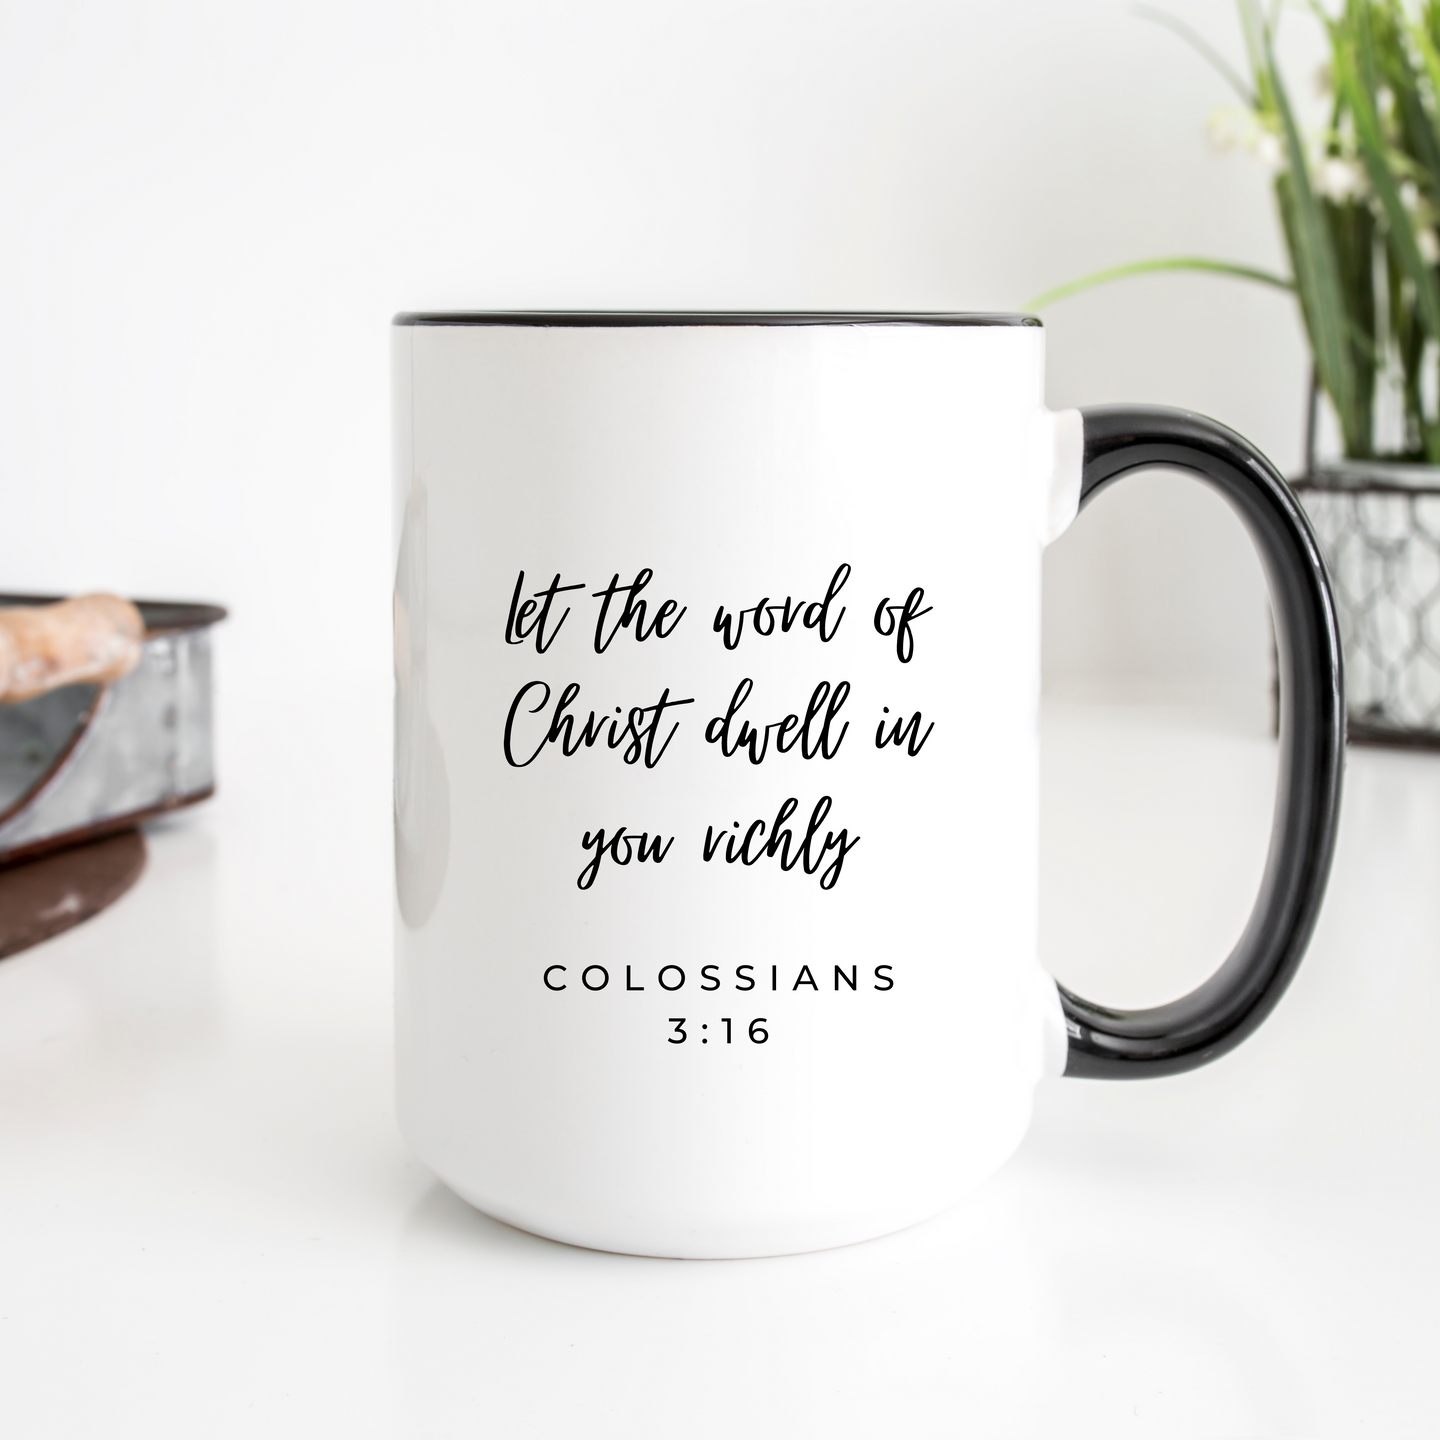 Let The Word Of Christ Dwell In You Richly - 15oz Ceramic Mug